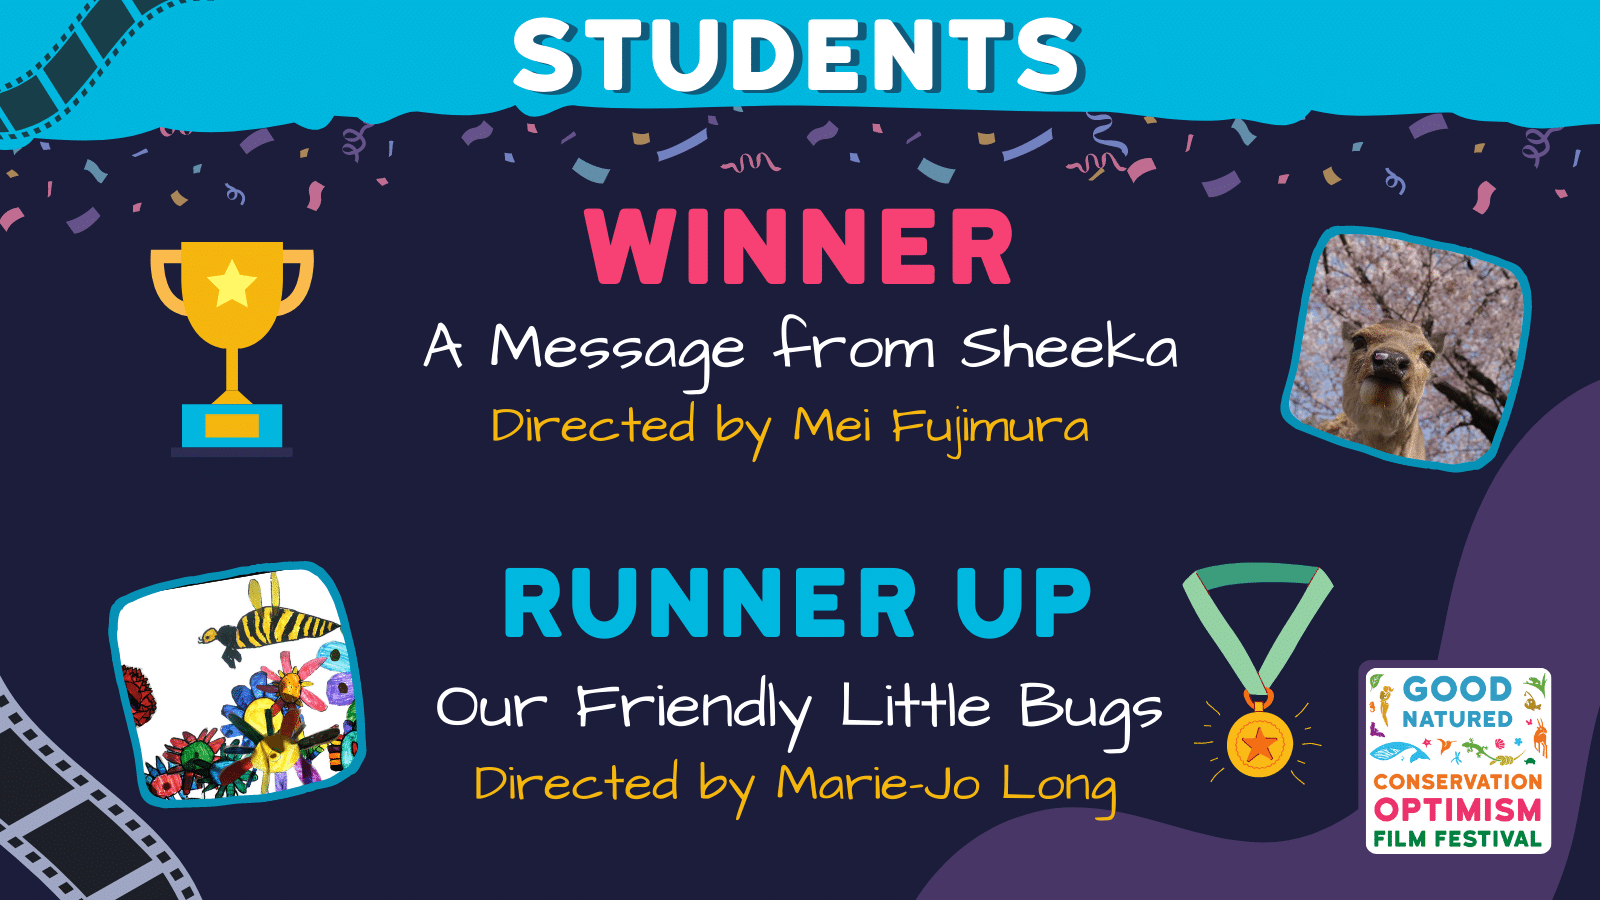 Our winner is: A message from Sheeka - Directed by Mei Fujimura